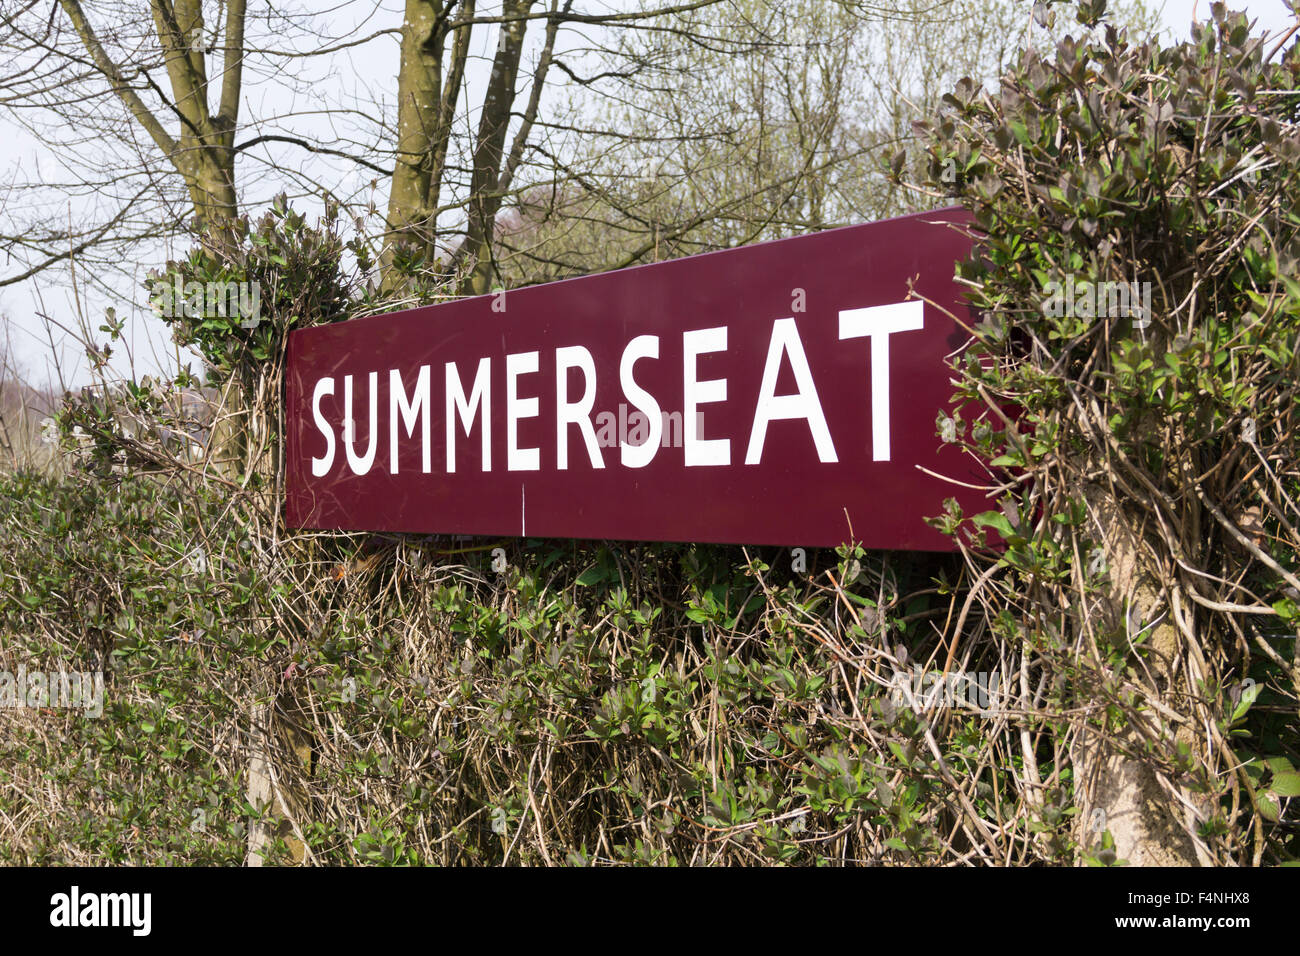 Railway station sign (British Railways style) at Summerseat, a countryside station on the heritage East Lancashire Railway. Stock Photo